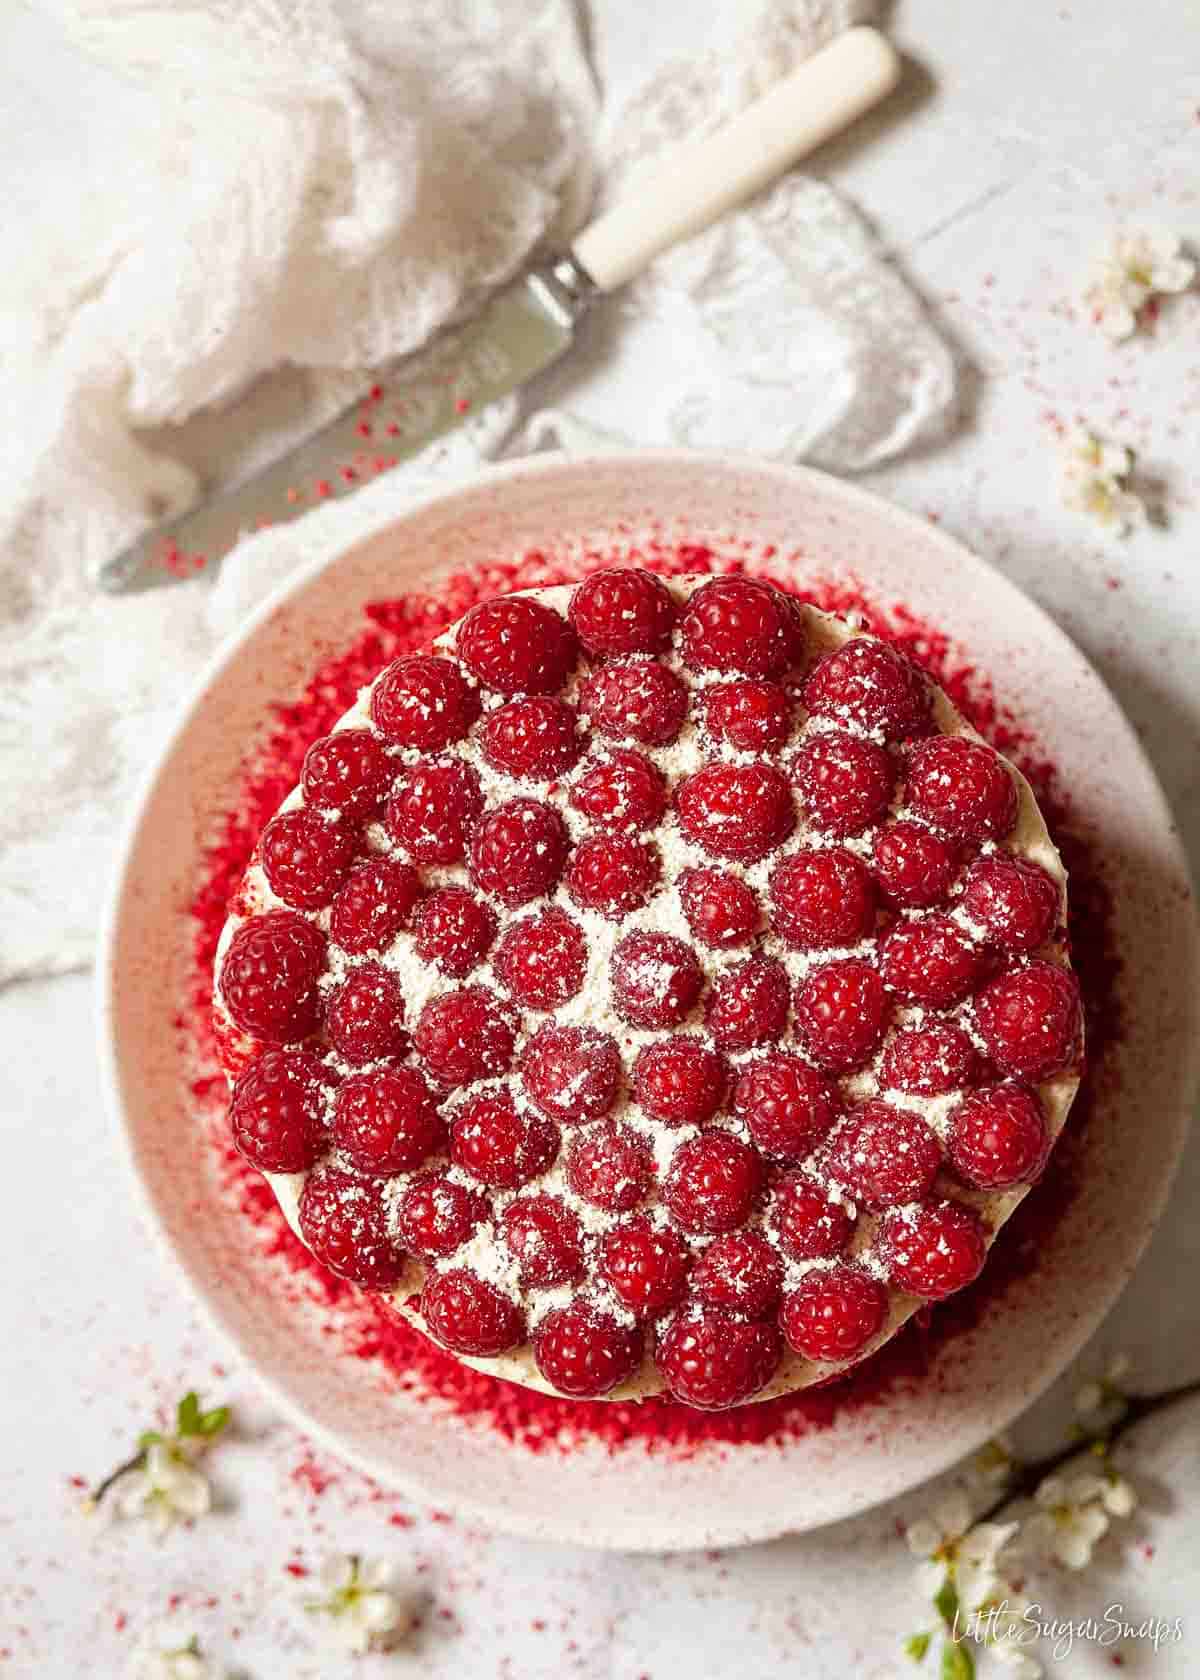 A large cake decorated with fresh berries and grated white chocolate.